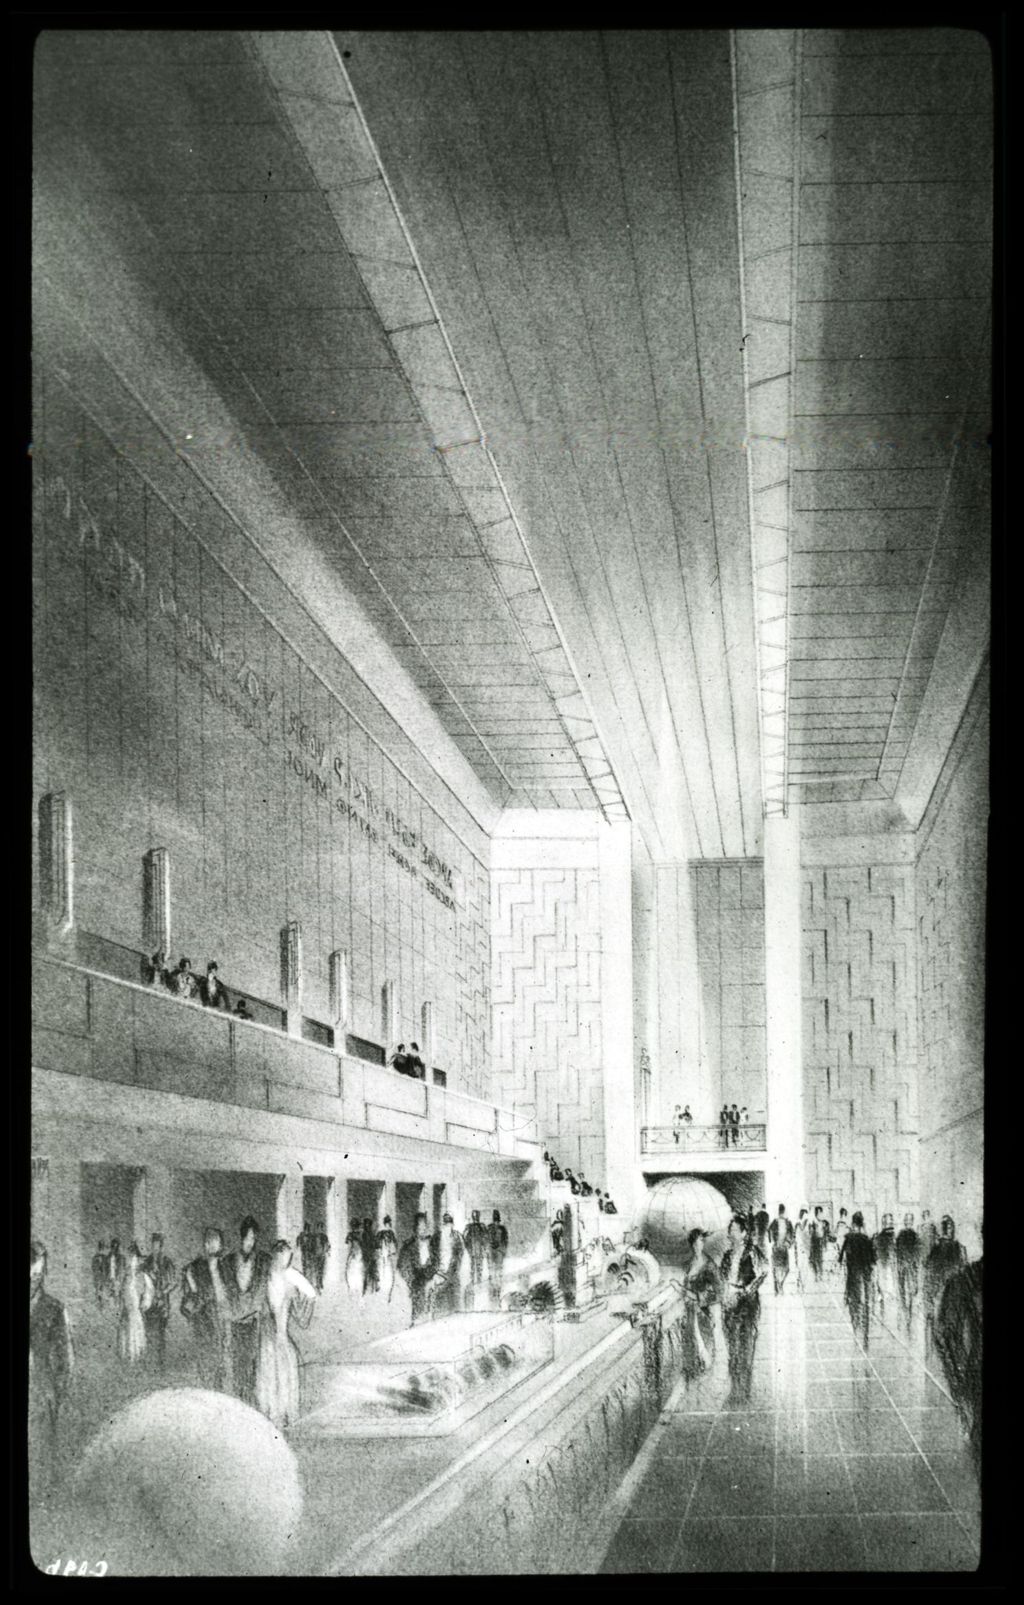 Miniature of Artist's sketch of the Great Hall at the Century of Progress Hall of Science